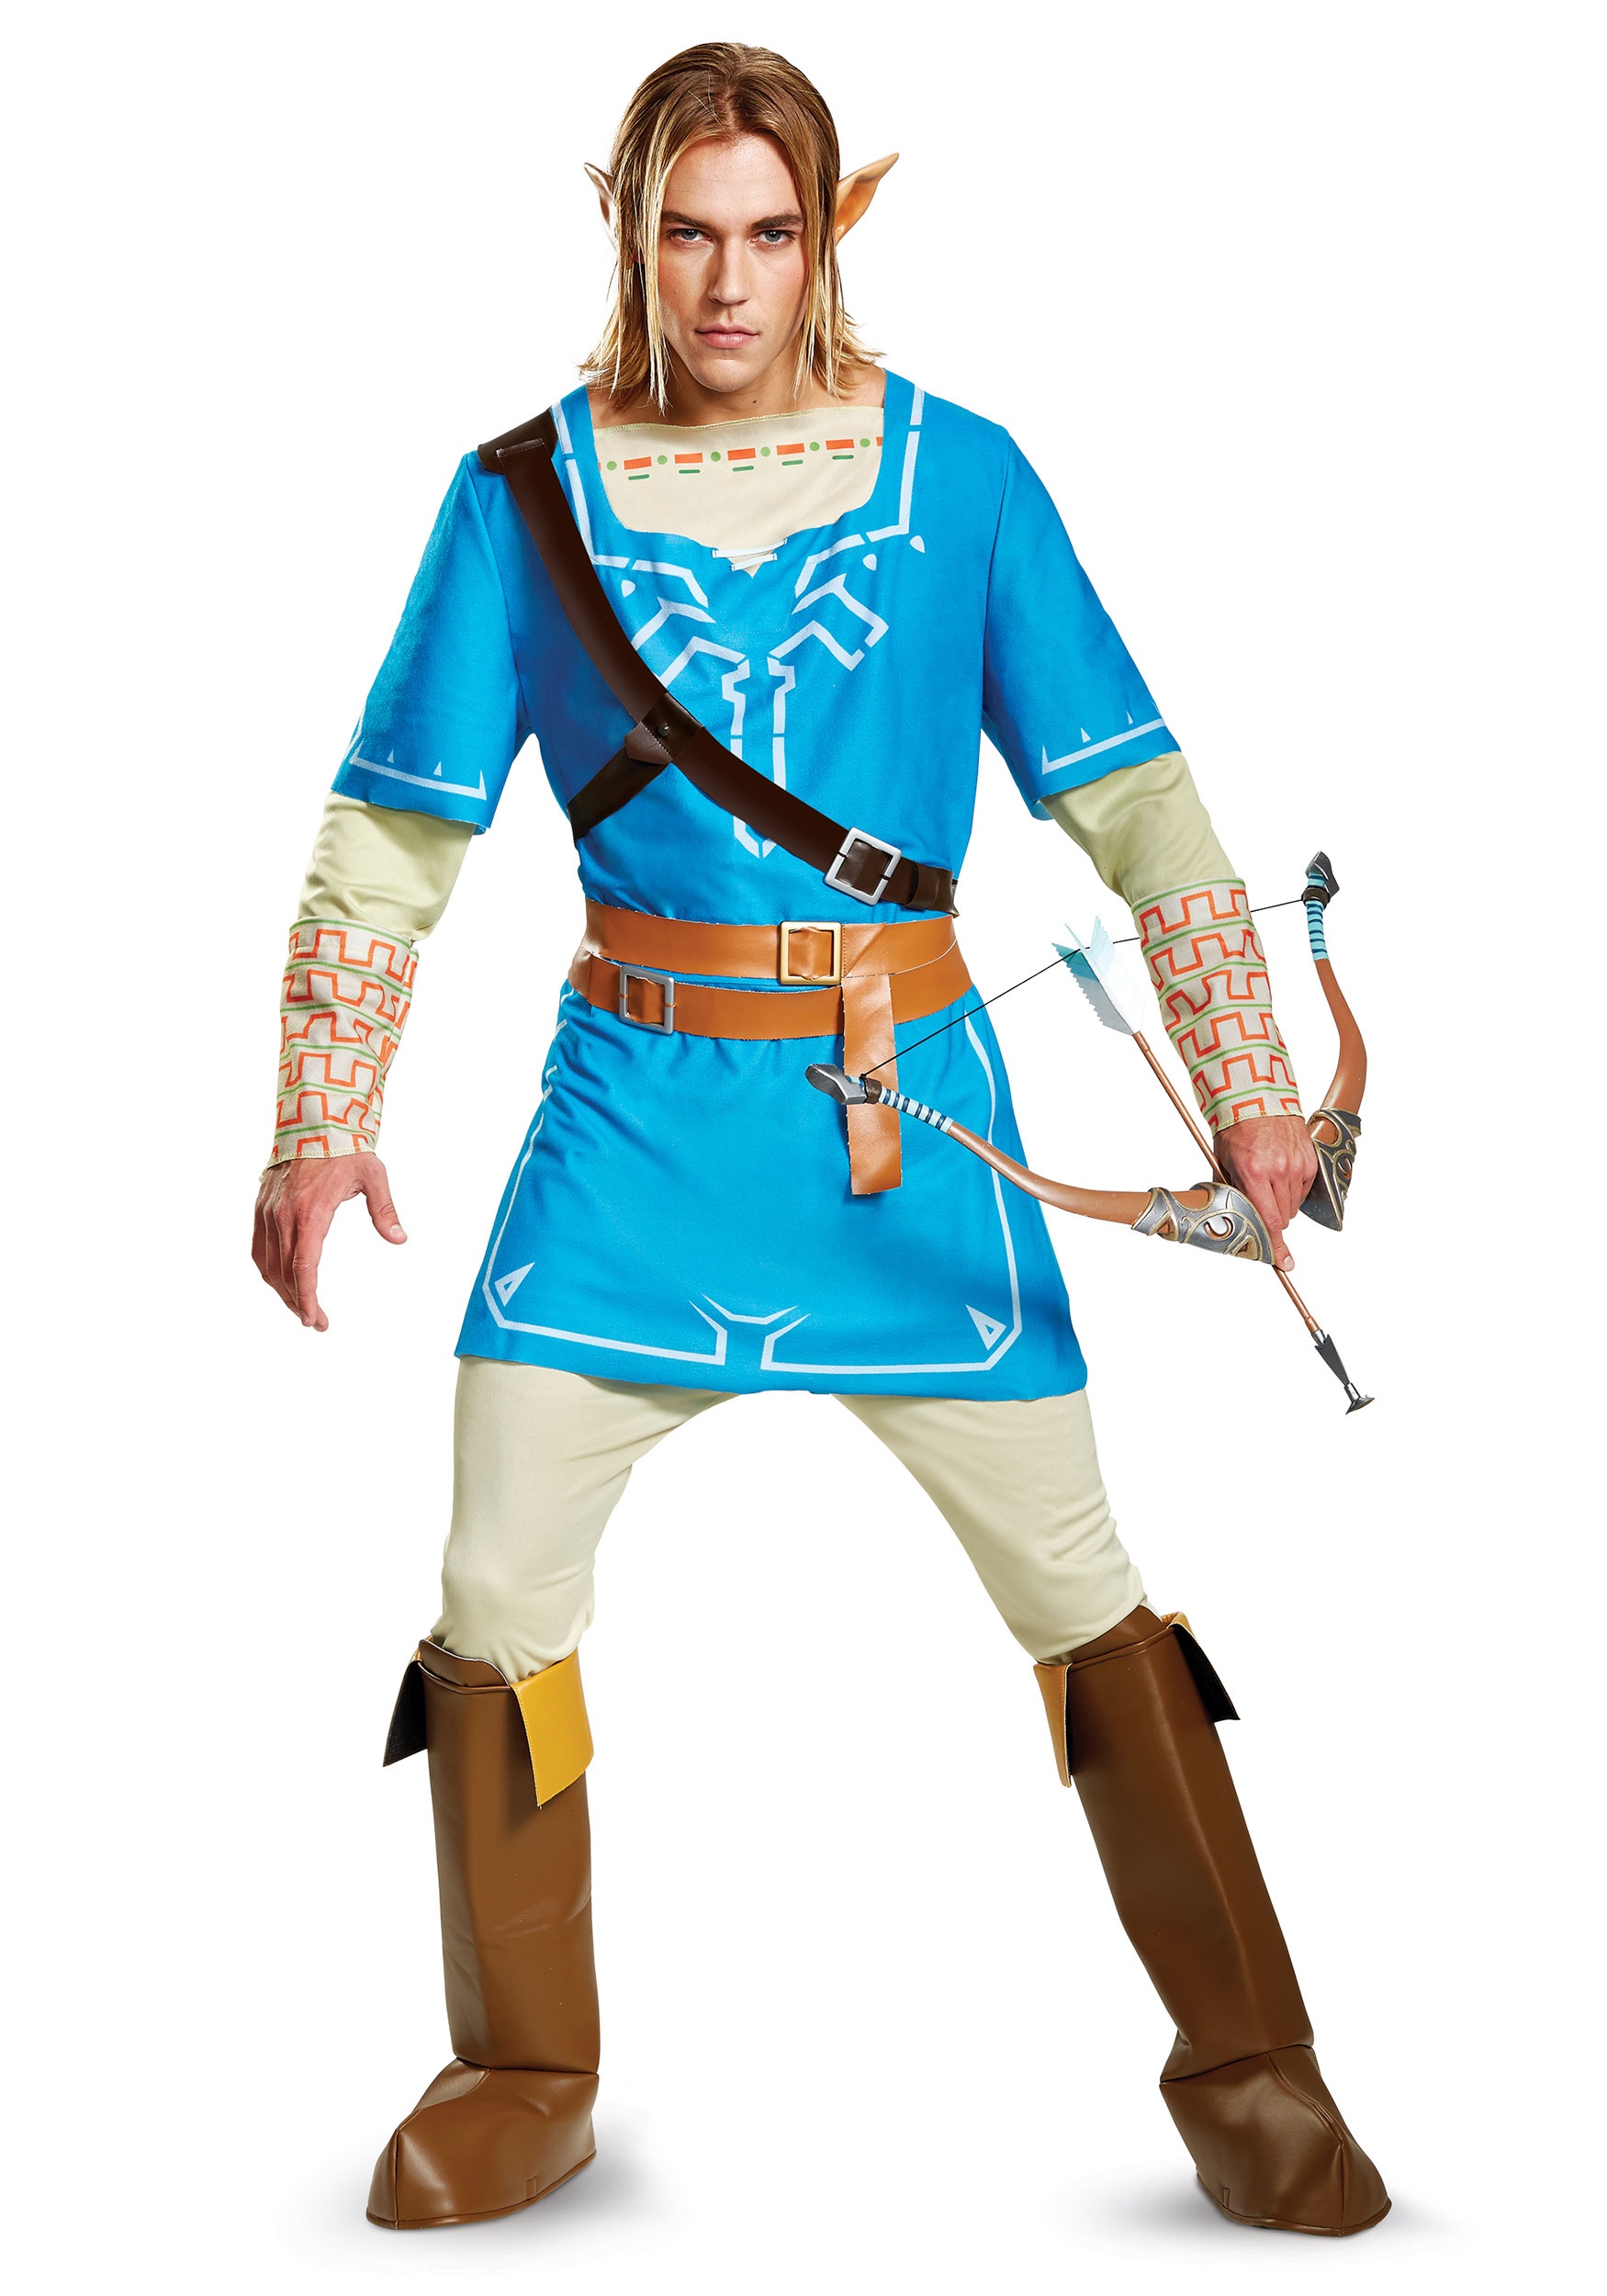 Link Breath Of The Wild Deluxe Adult Fancy Dress Costume